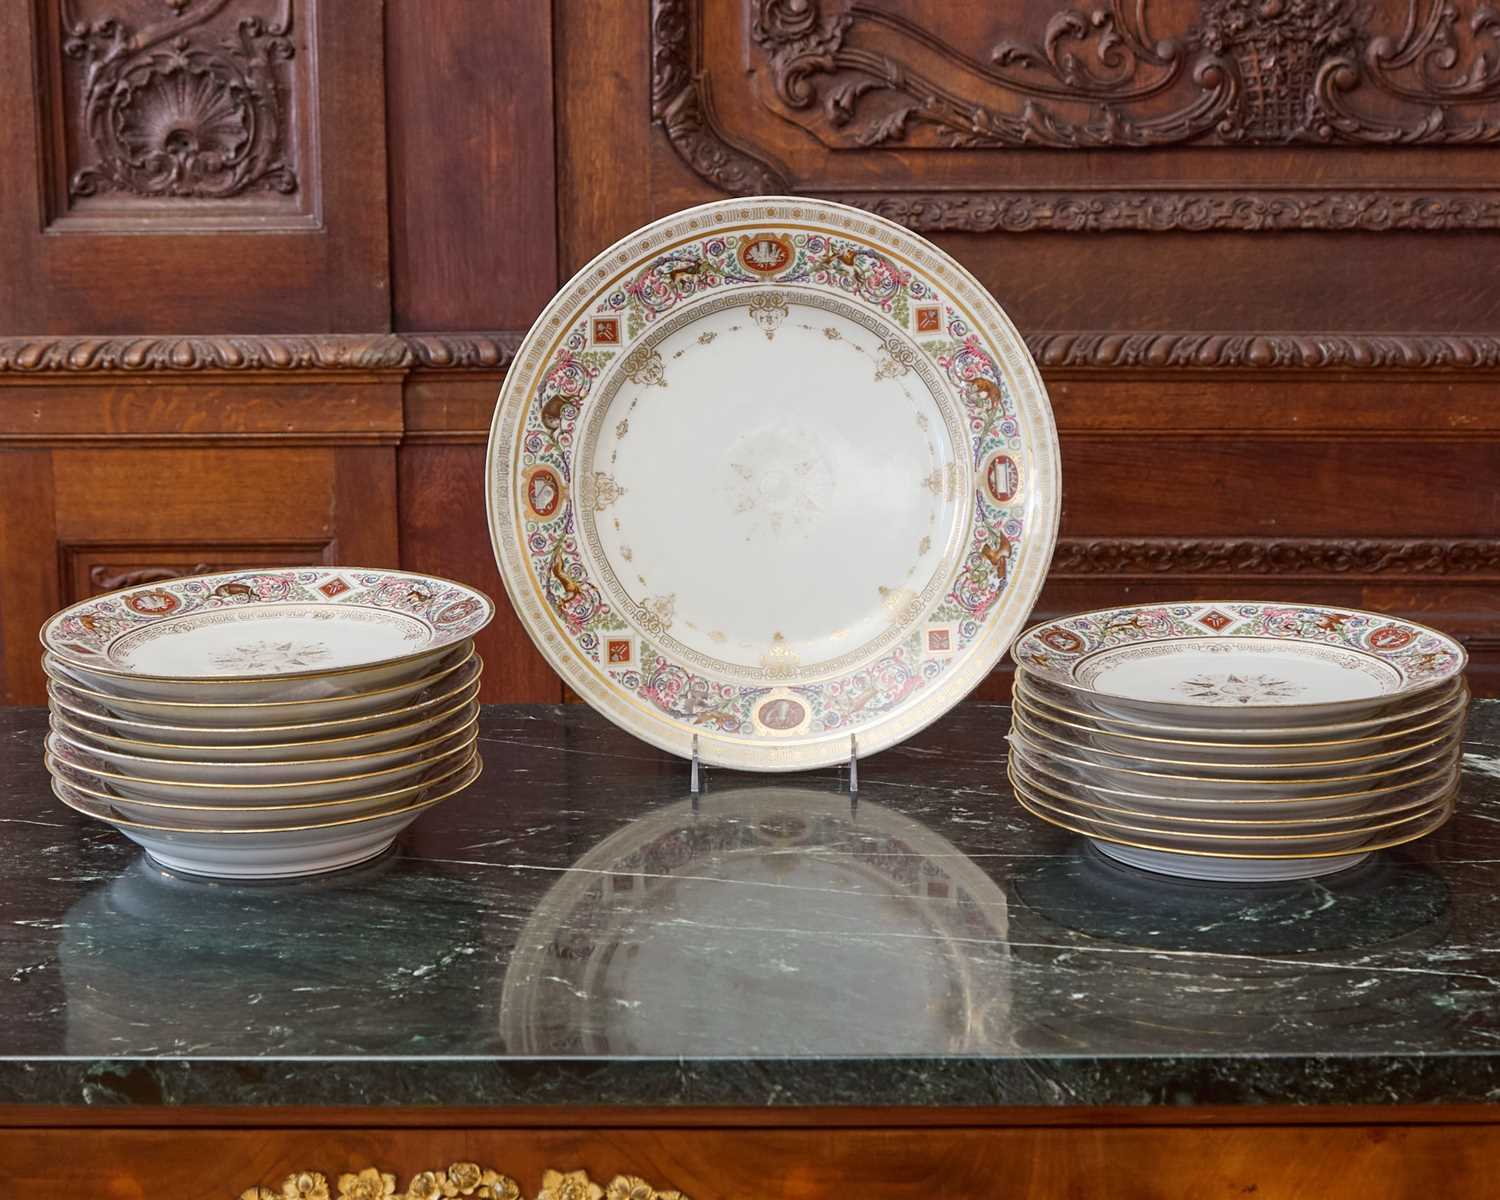 Lot 550 - EIGHTEEN SEVRES-STYLE PORCELAIN PLATES AND A LARGE CHARGER